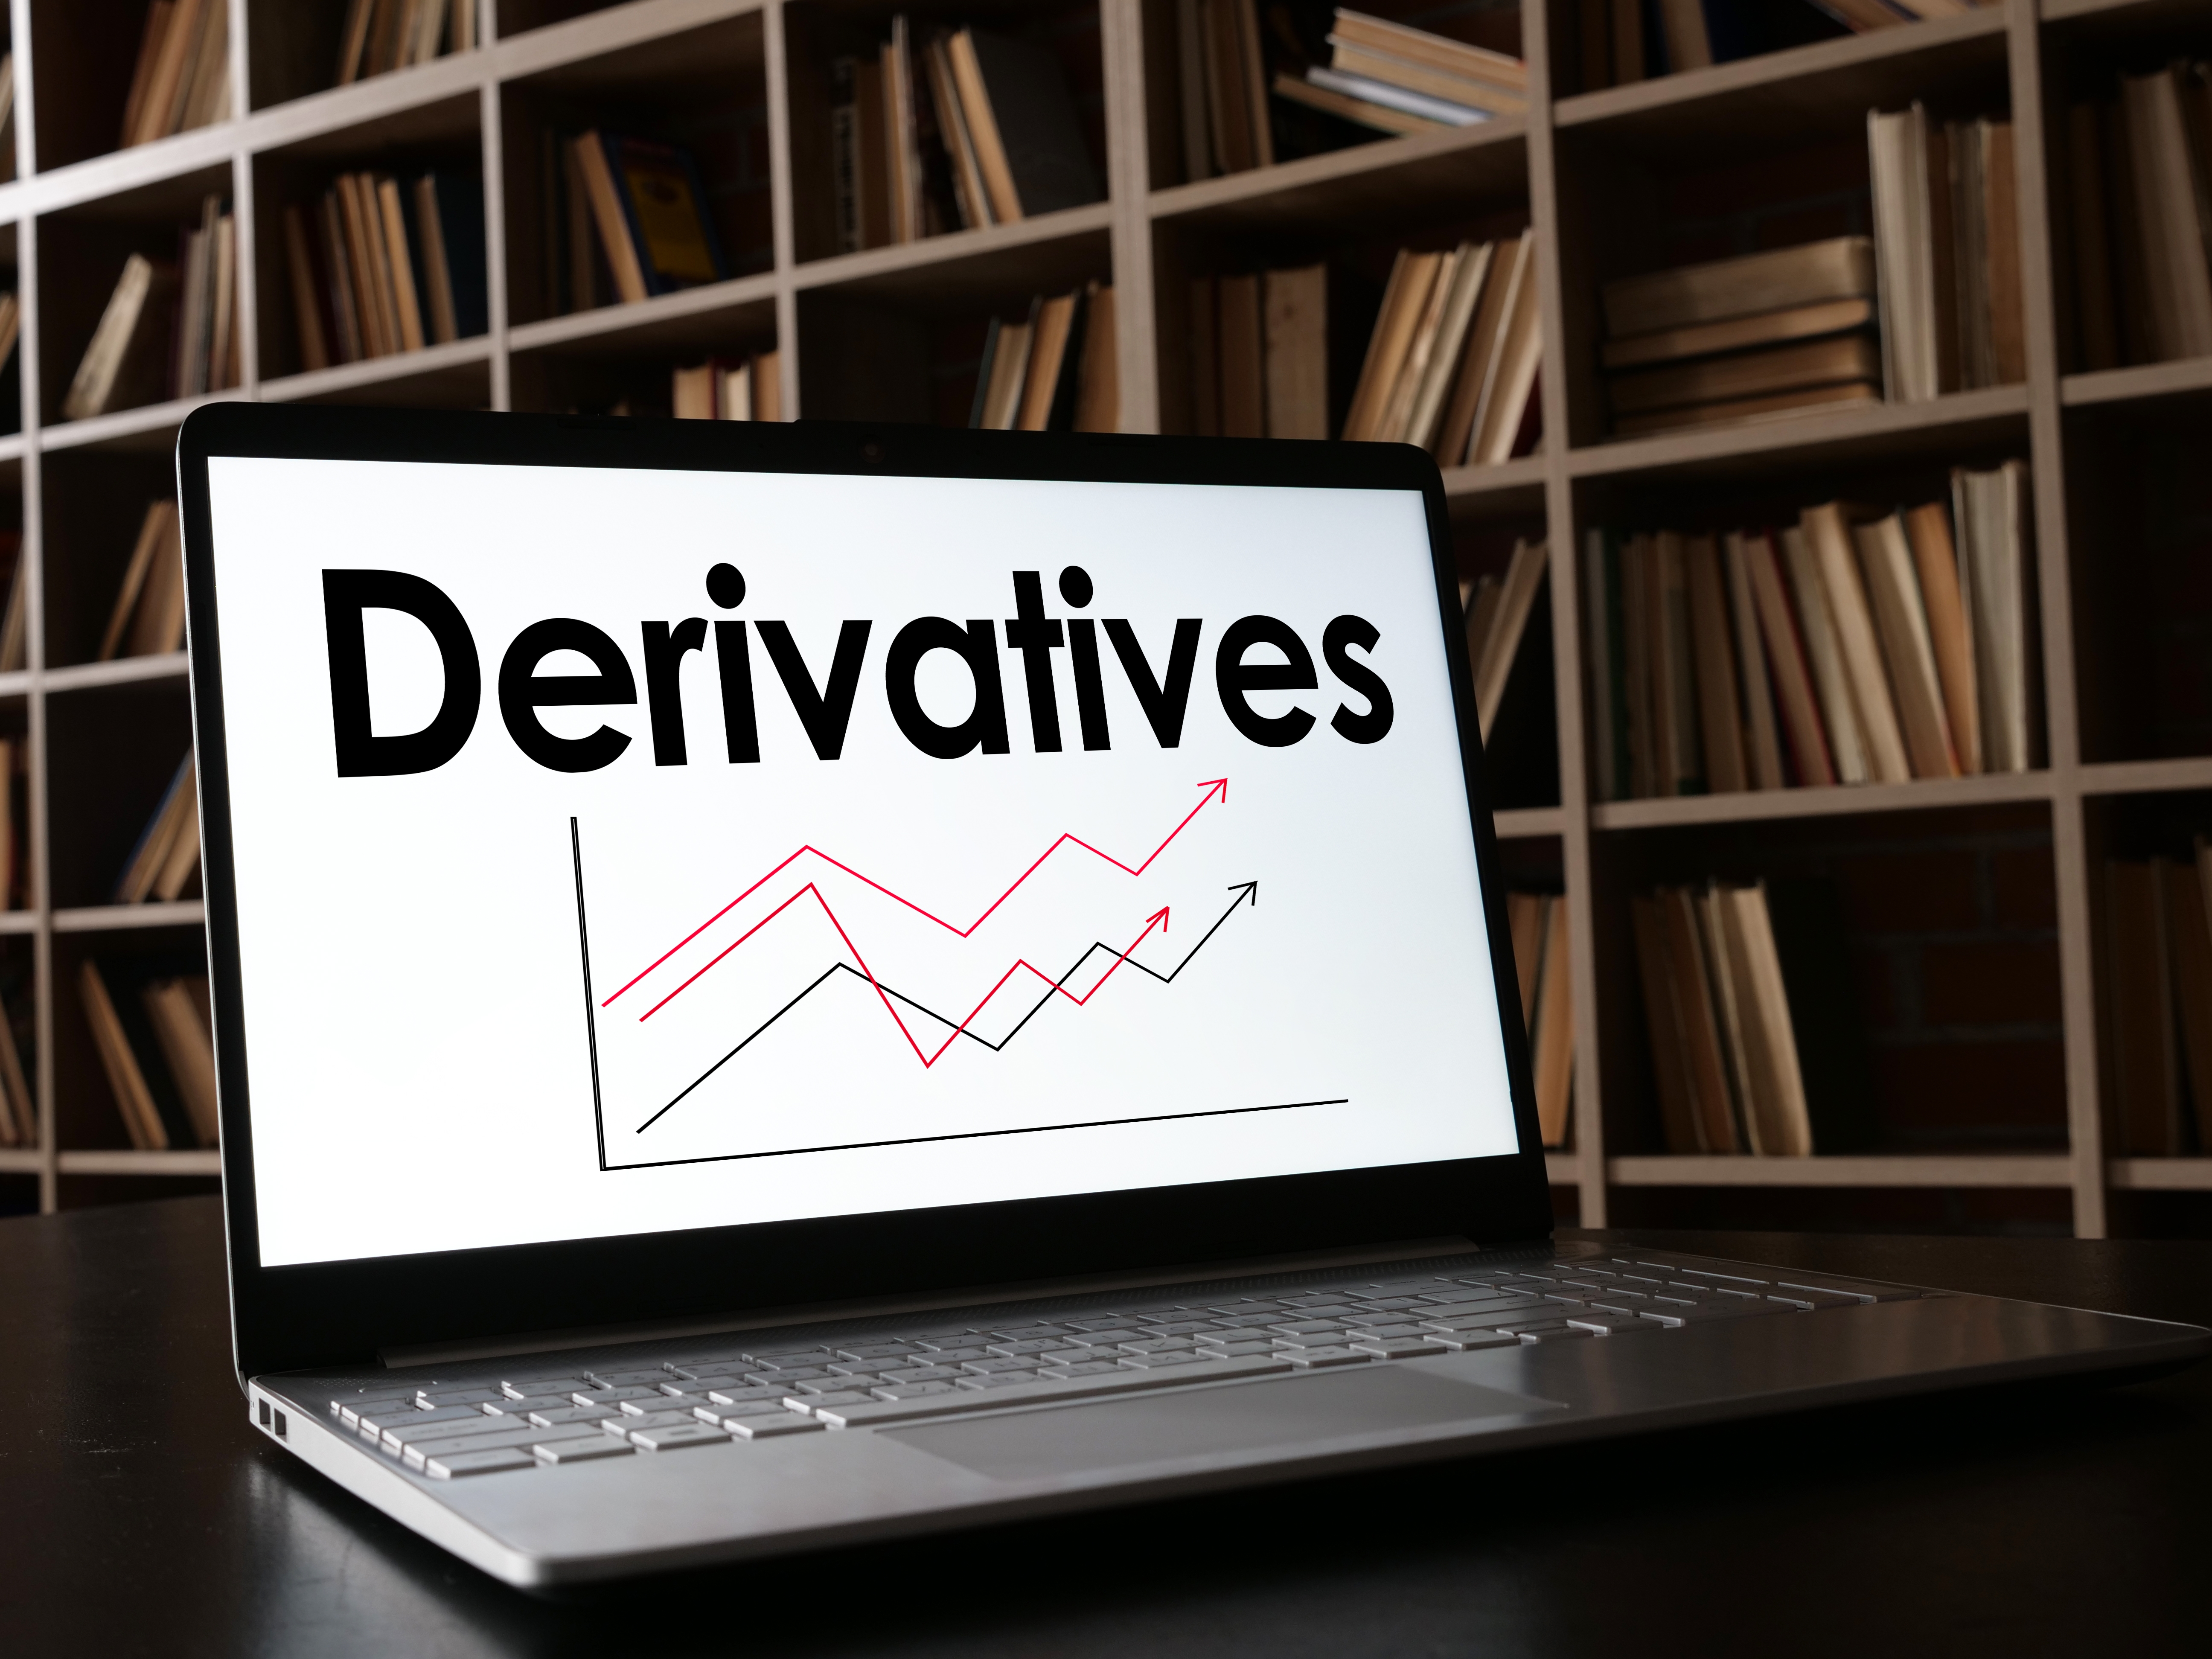 Derivatives - Definitions, Types, Pros and Cons